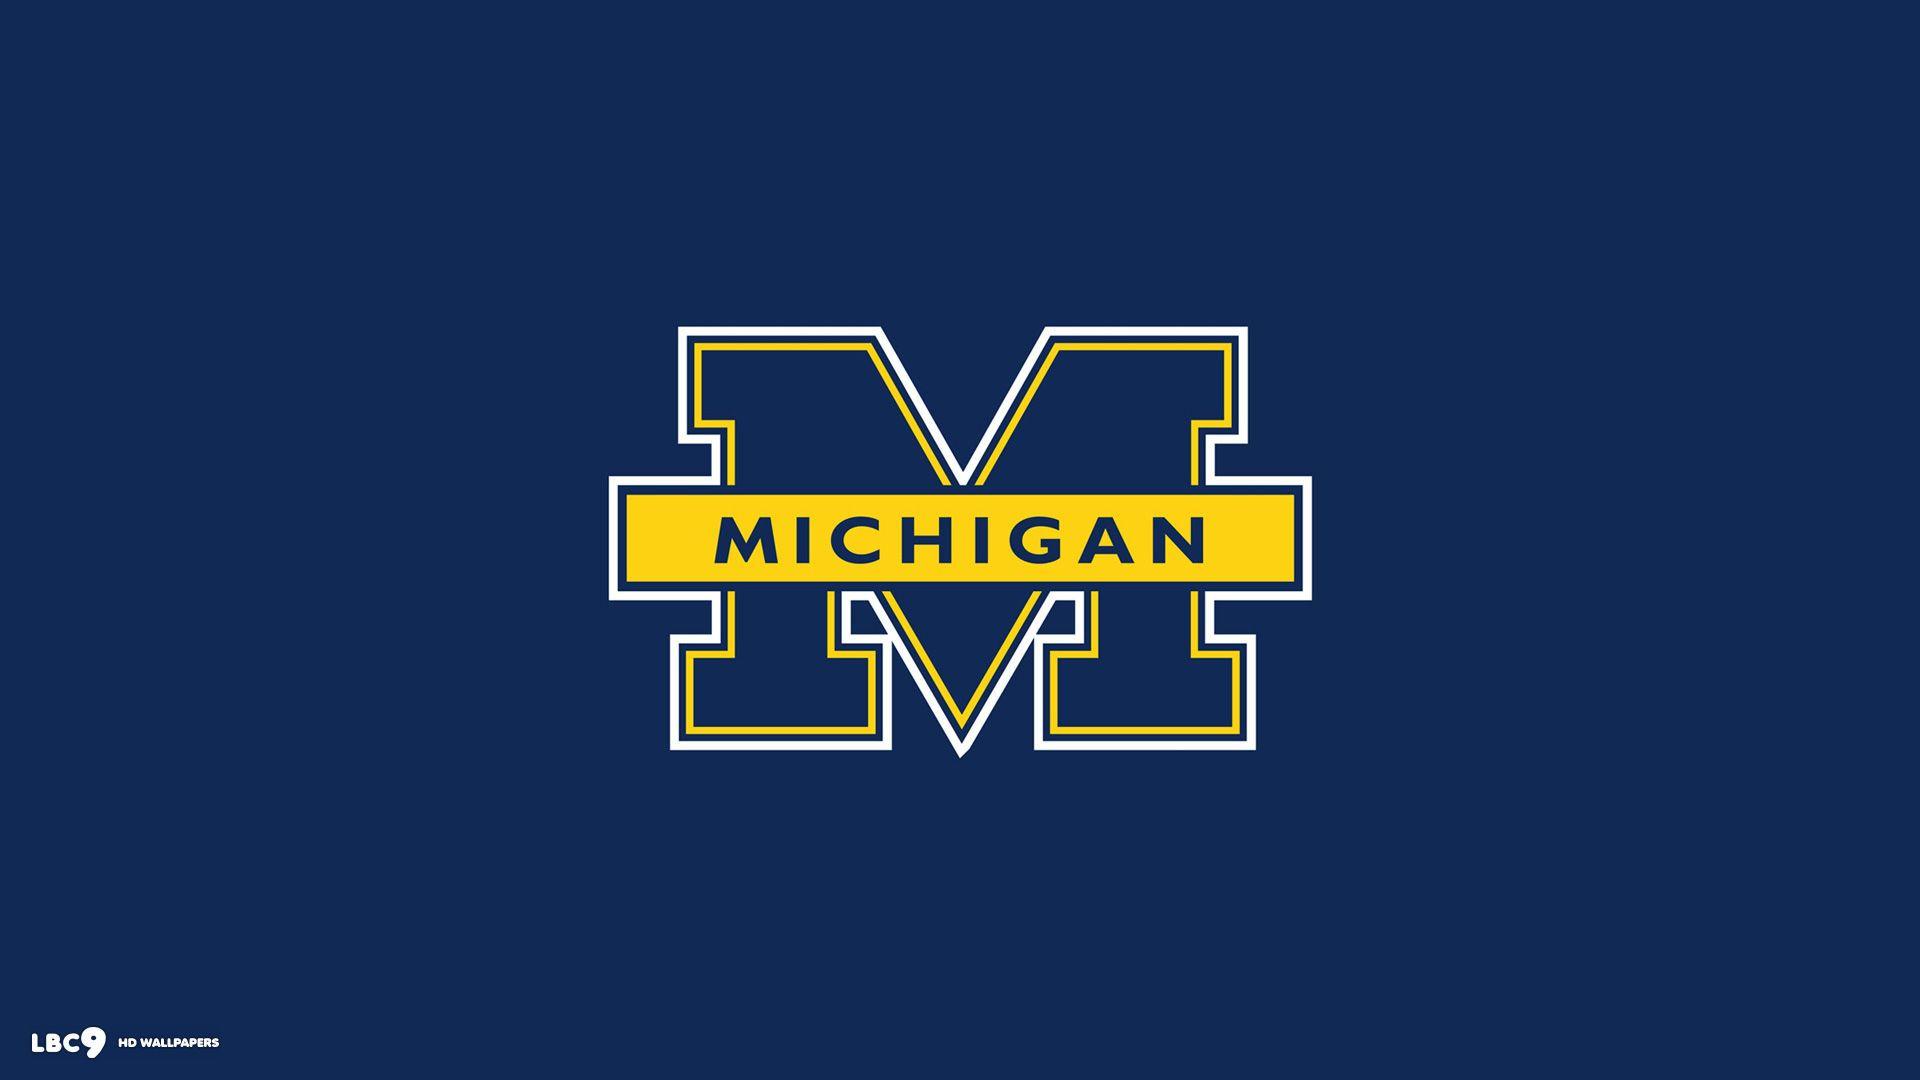 Michigan wolverines wallpapers |